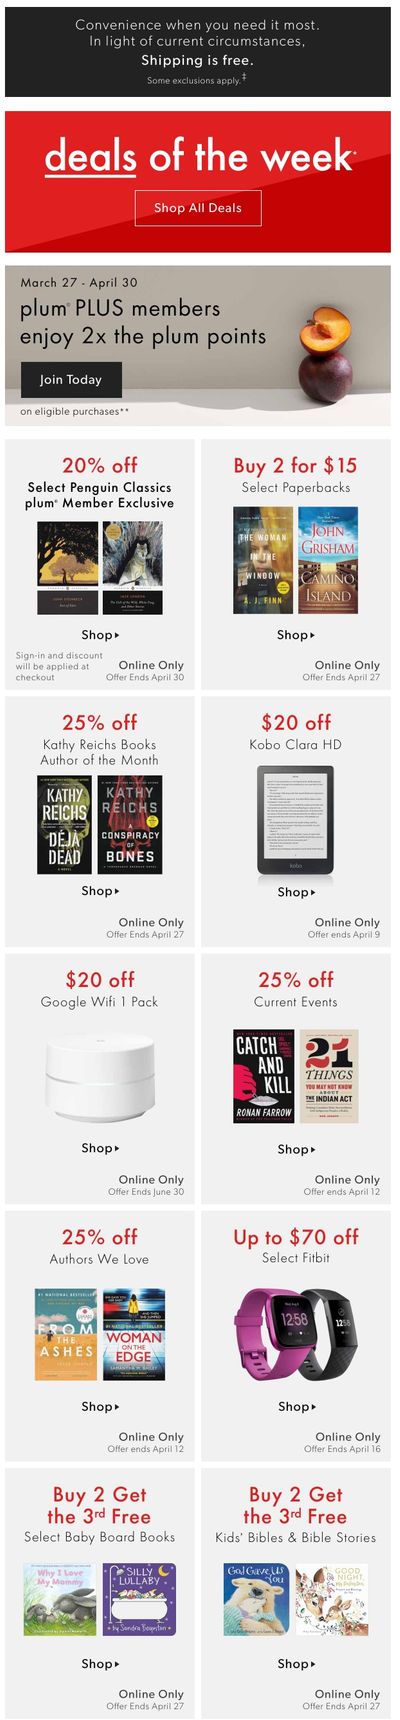 Chapters Indigo Online Deals of the Week April 6 to 12